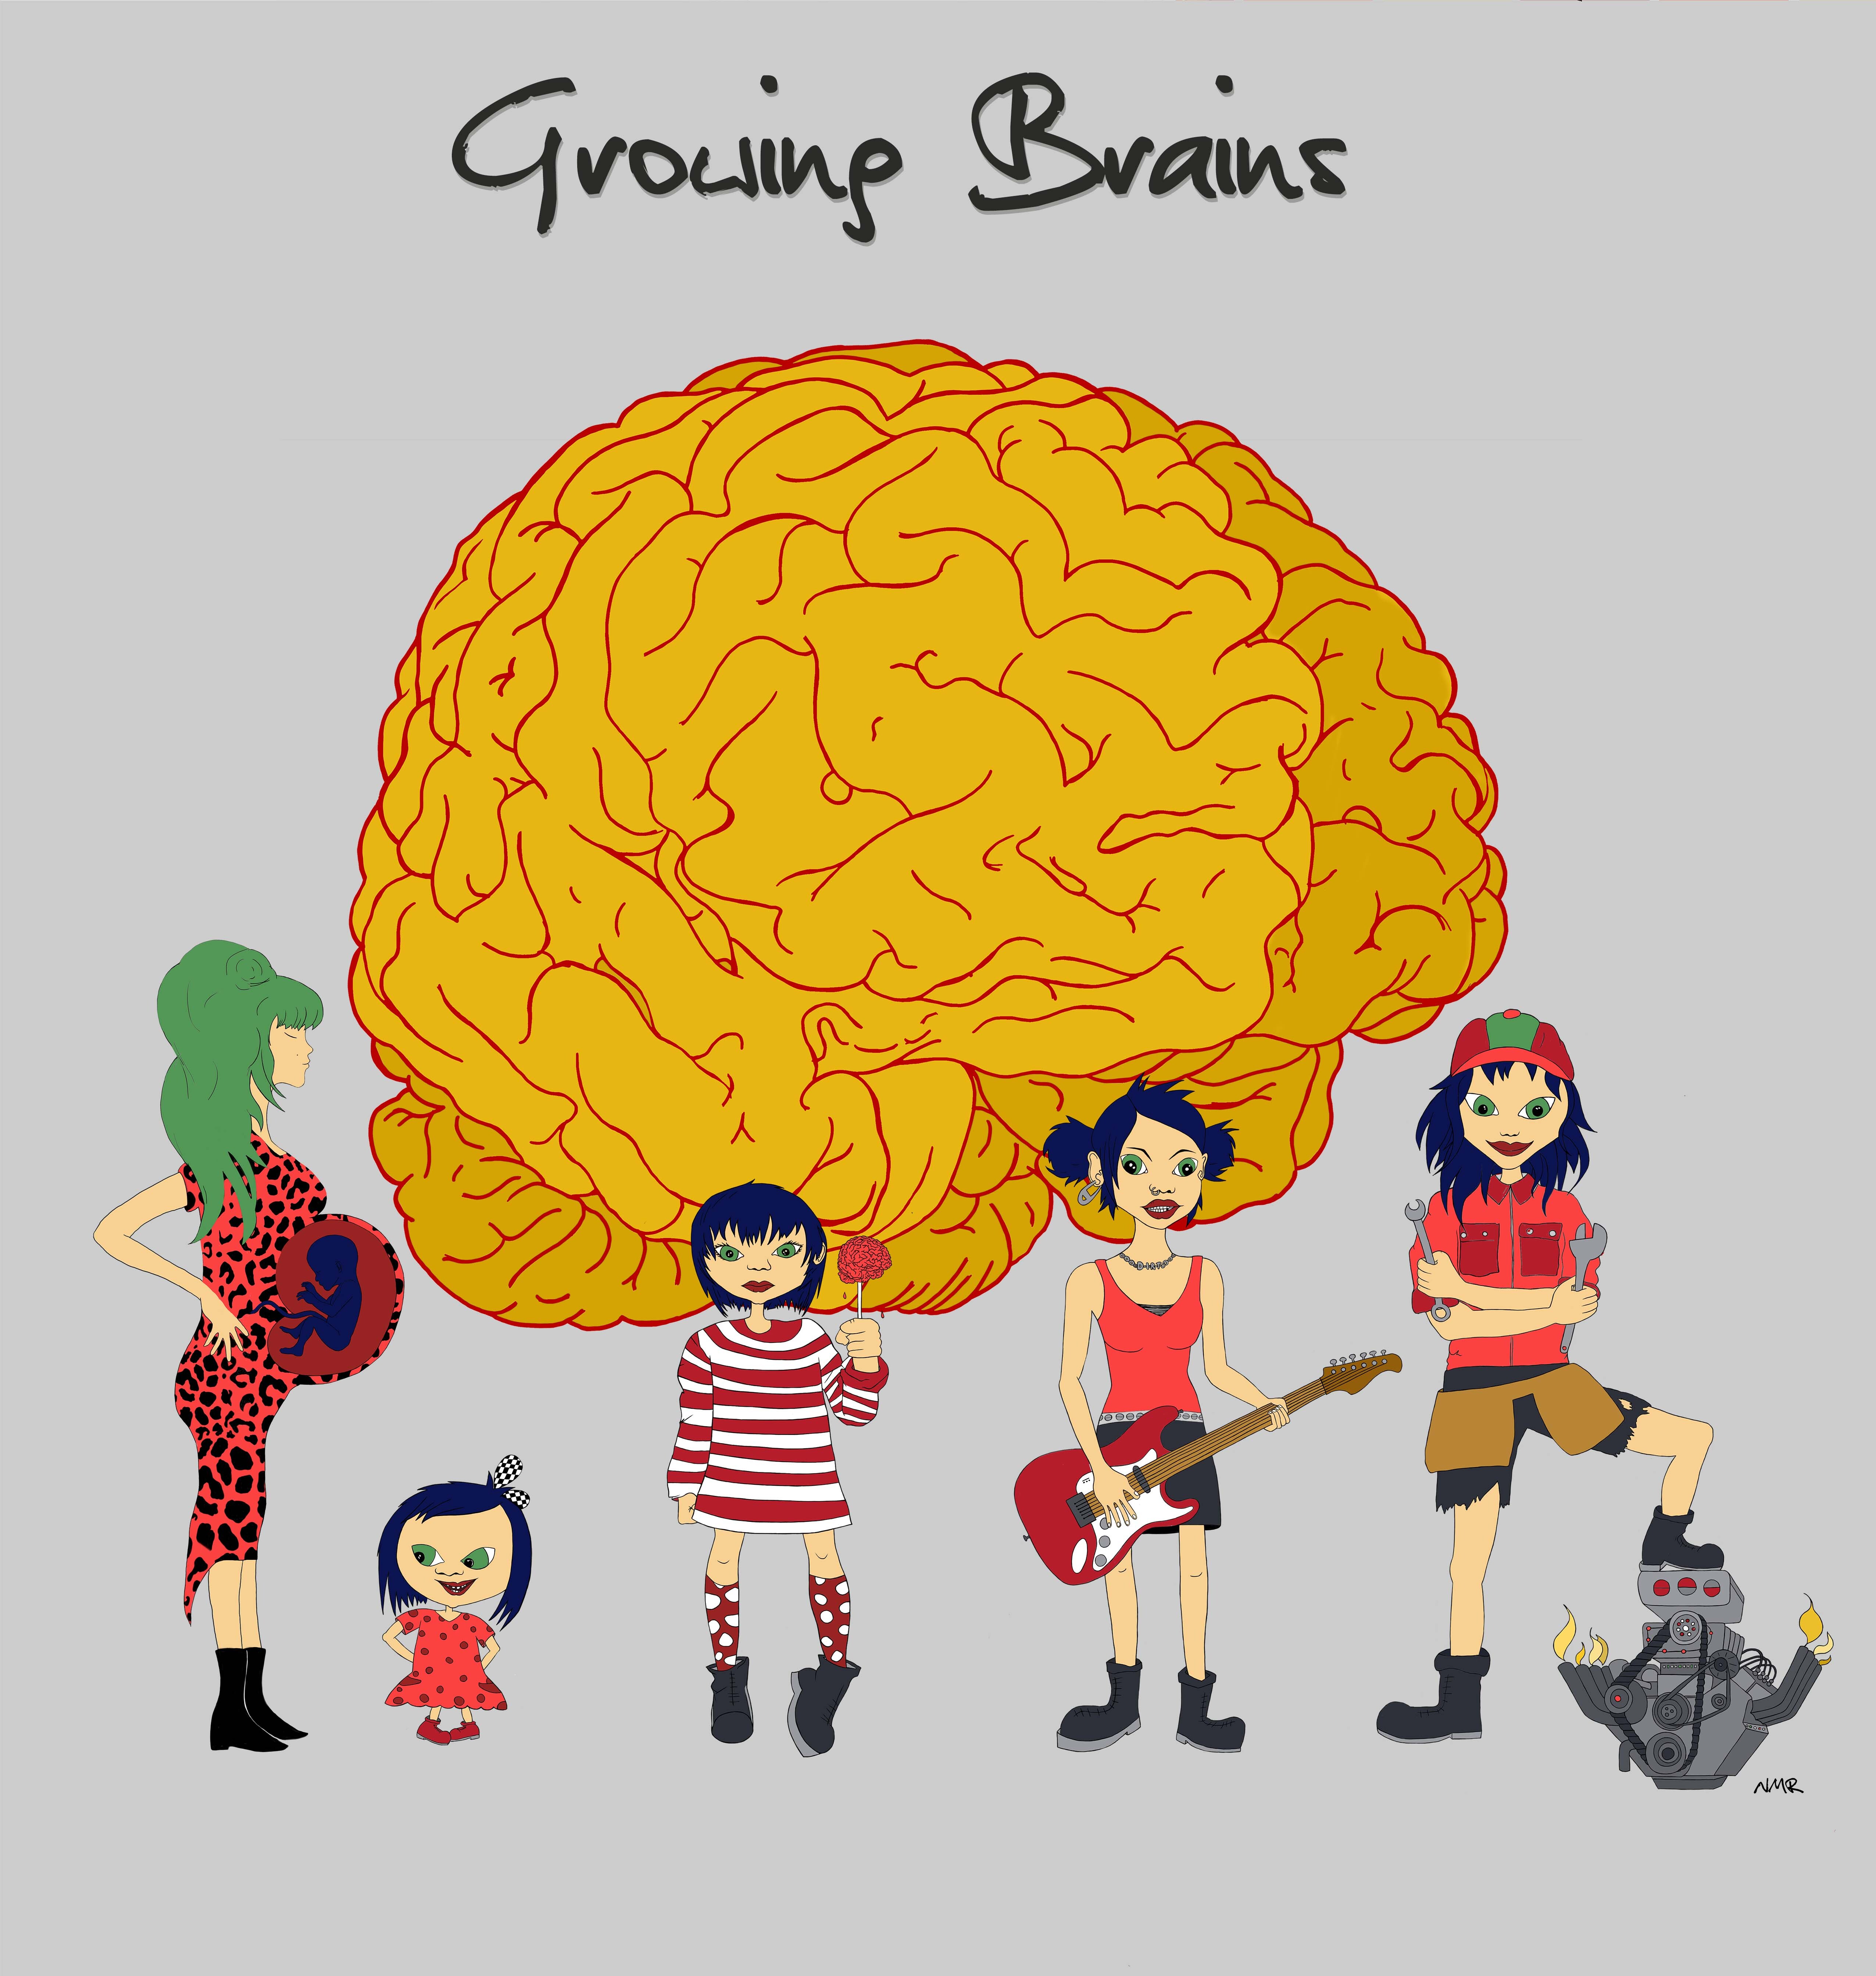 Growing Brains - a Science Outreach Initiative